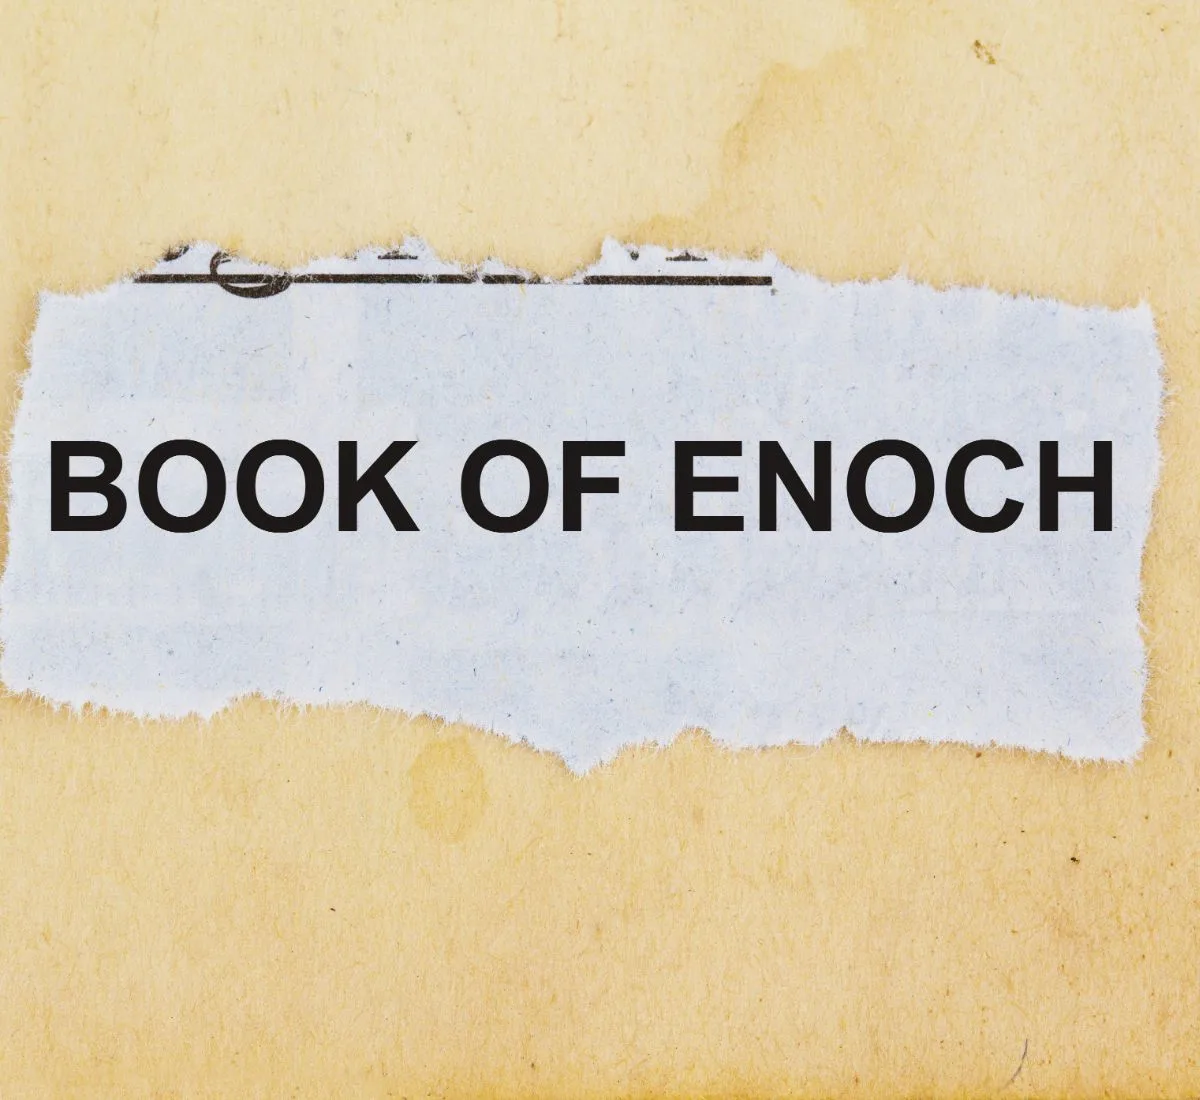 Question - why is the Book of Enoch not in the Bible